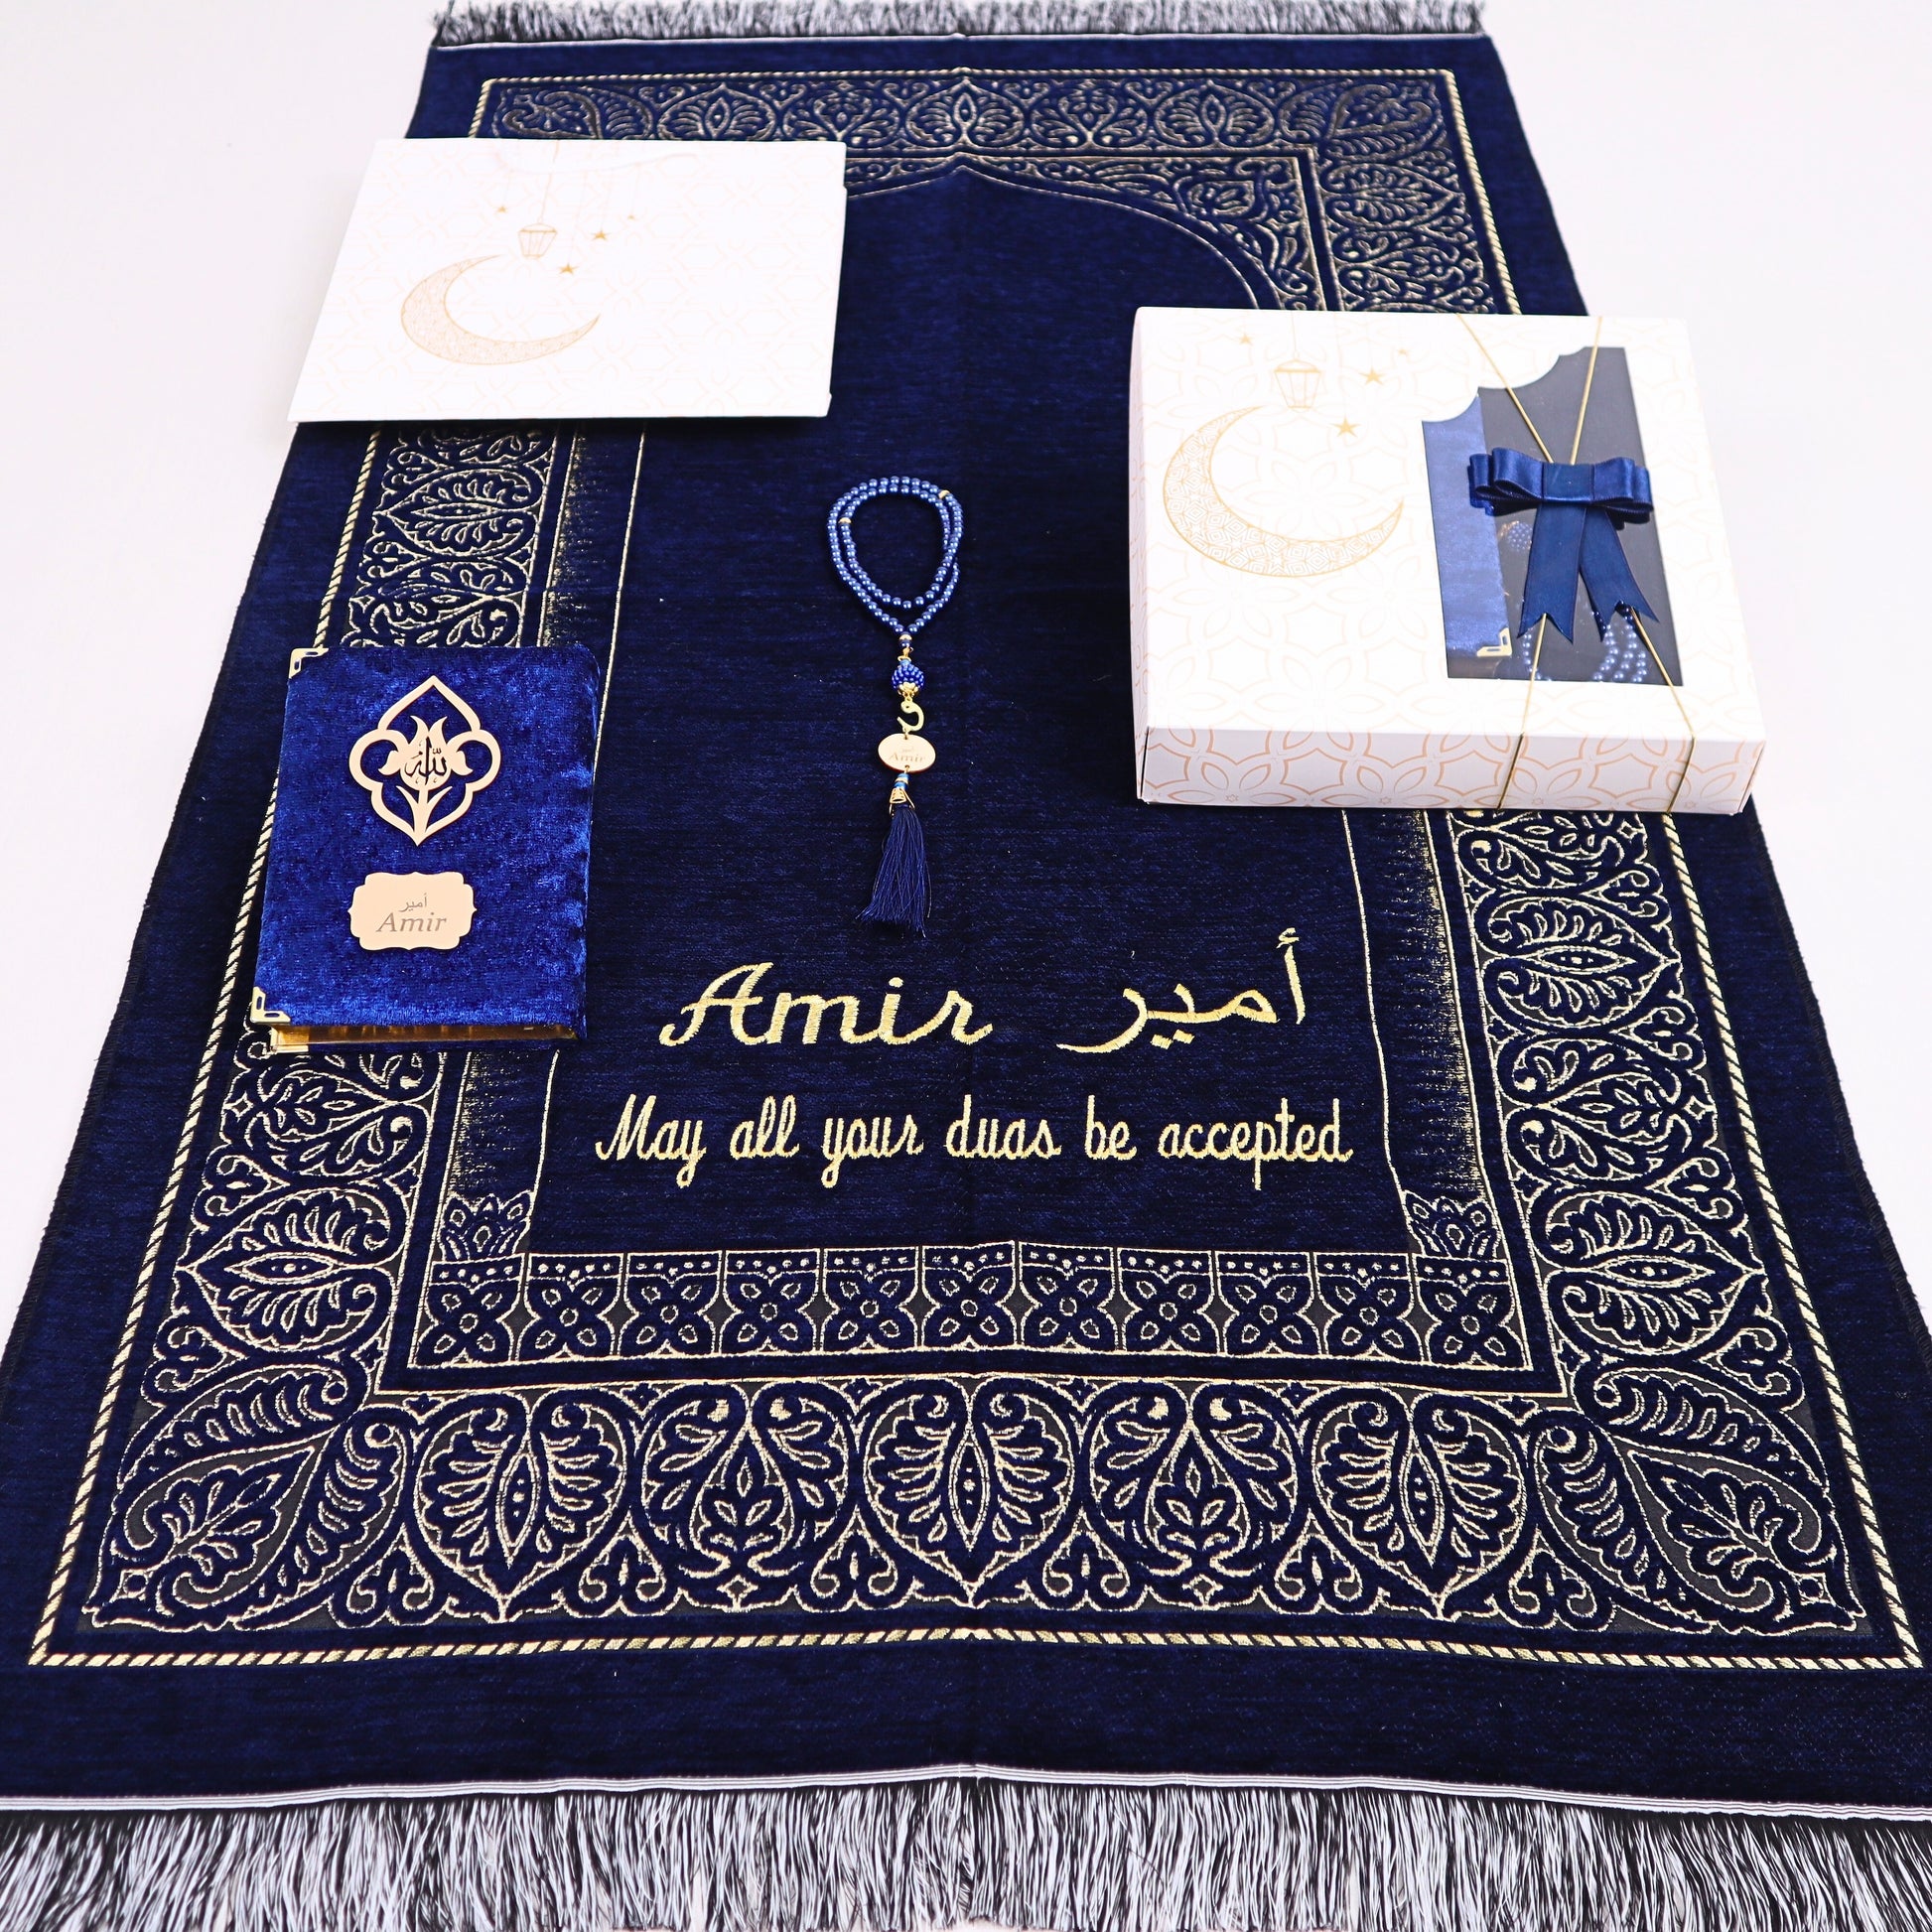 Personalized Taffeta Prayer Mat Quran Tasbeeh Islamic Muslim Gift Set - Islamic Elite Favors is a handmade gift shop offering a wide variety of unique and personalized gifts for all occasions. Whether you're looking for the perfect Ramadan, Eid, Hajj, wedding gift or something special for a birthday, baby shower or anniversary, we have something for everyone. High quality, made with love.